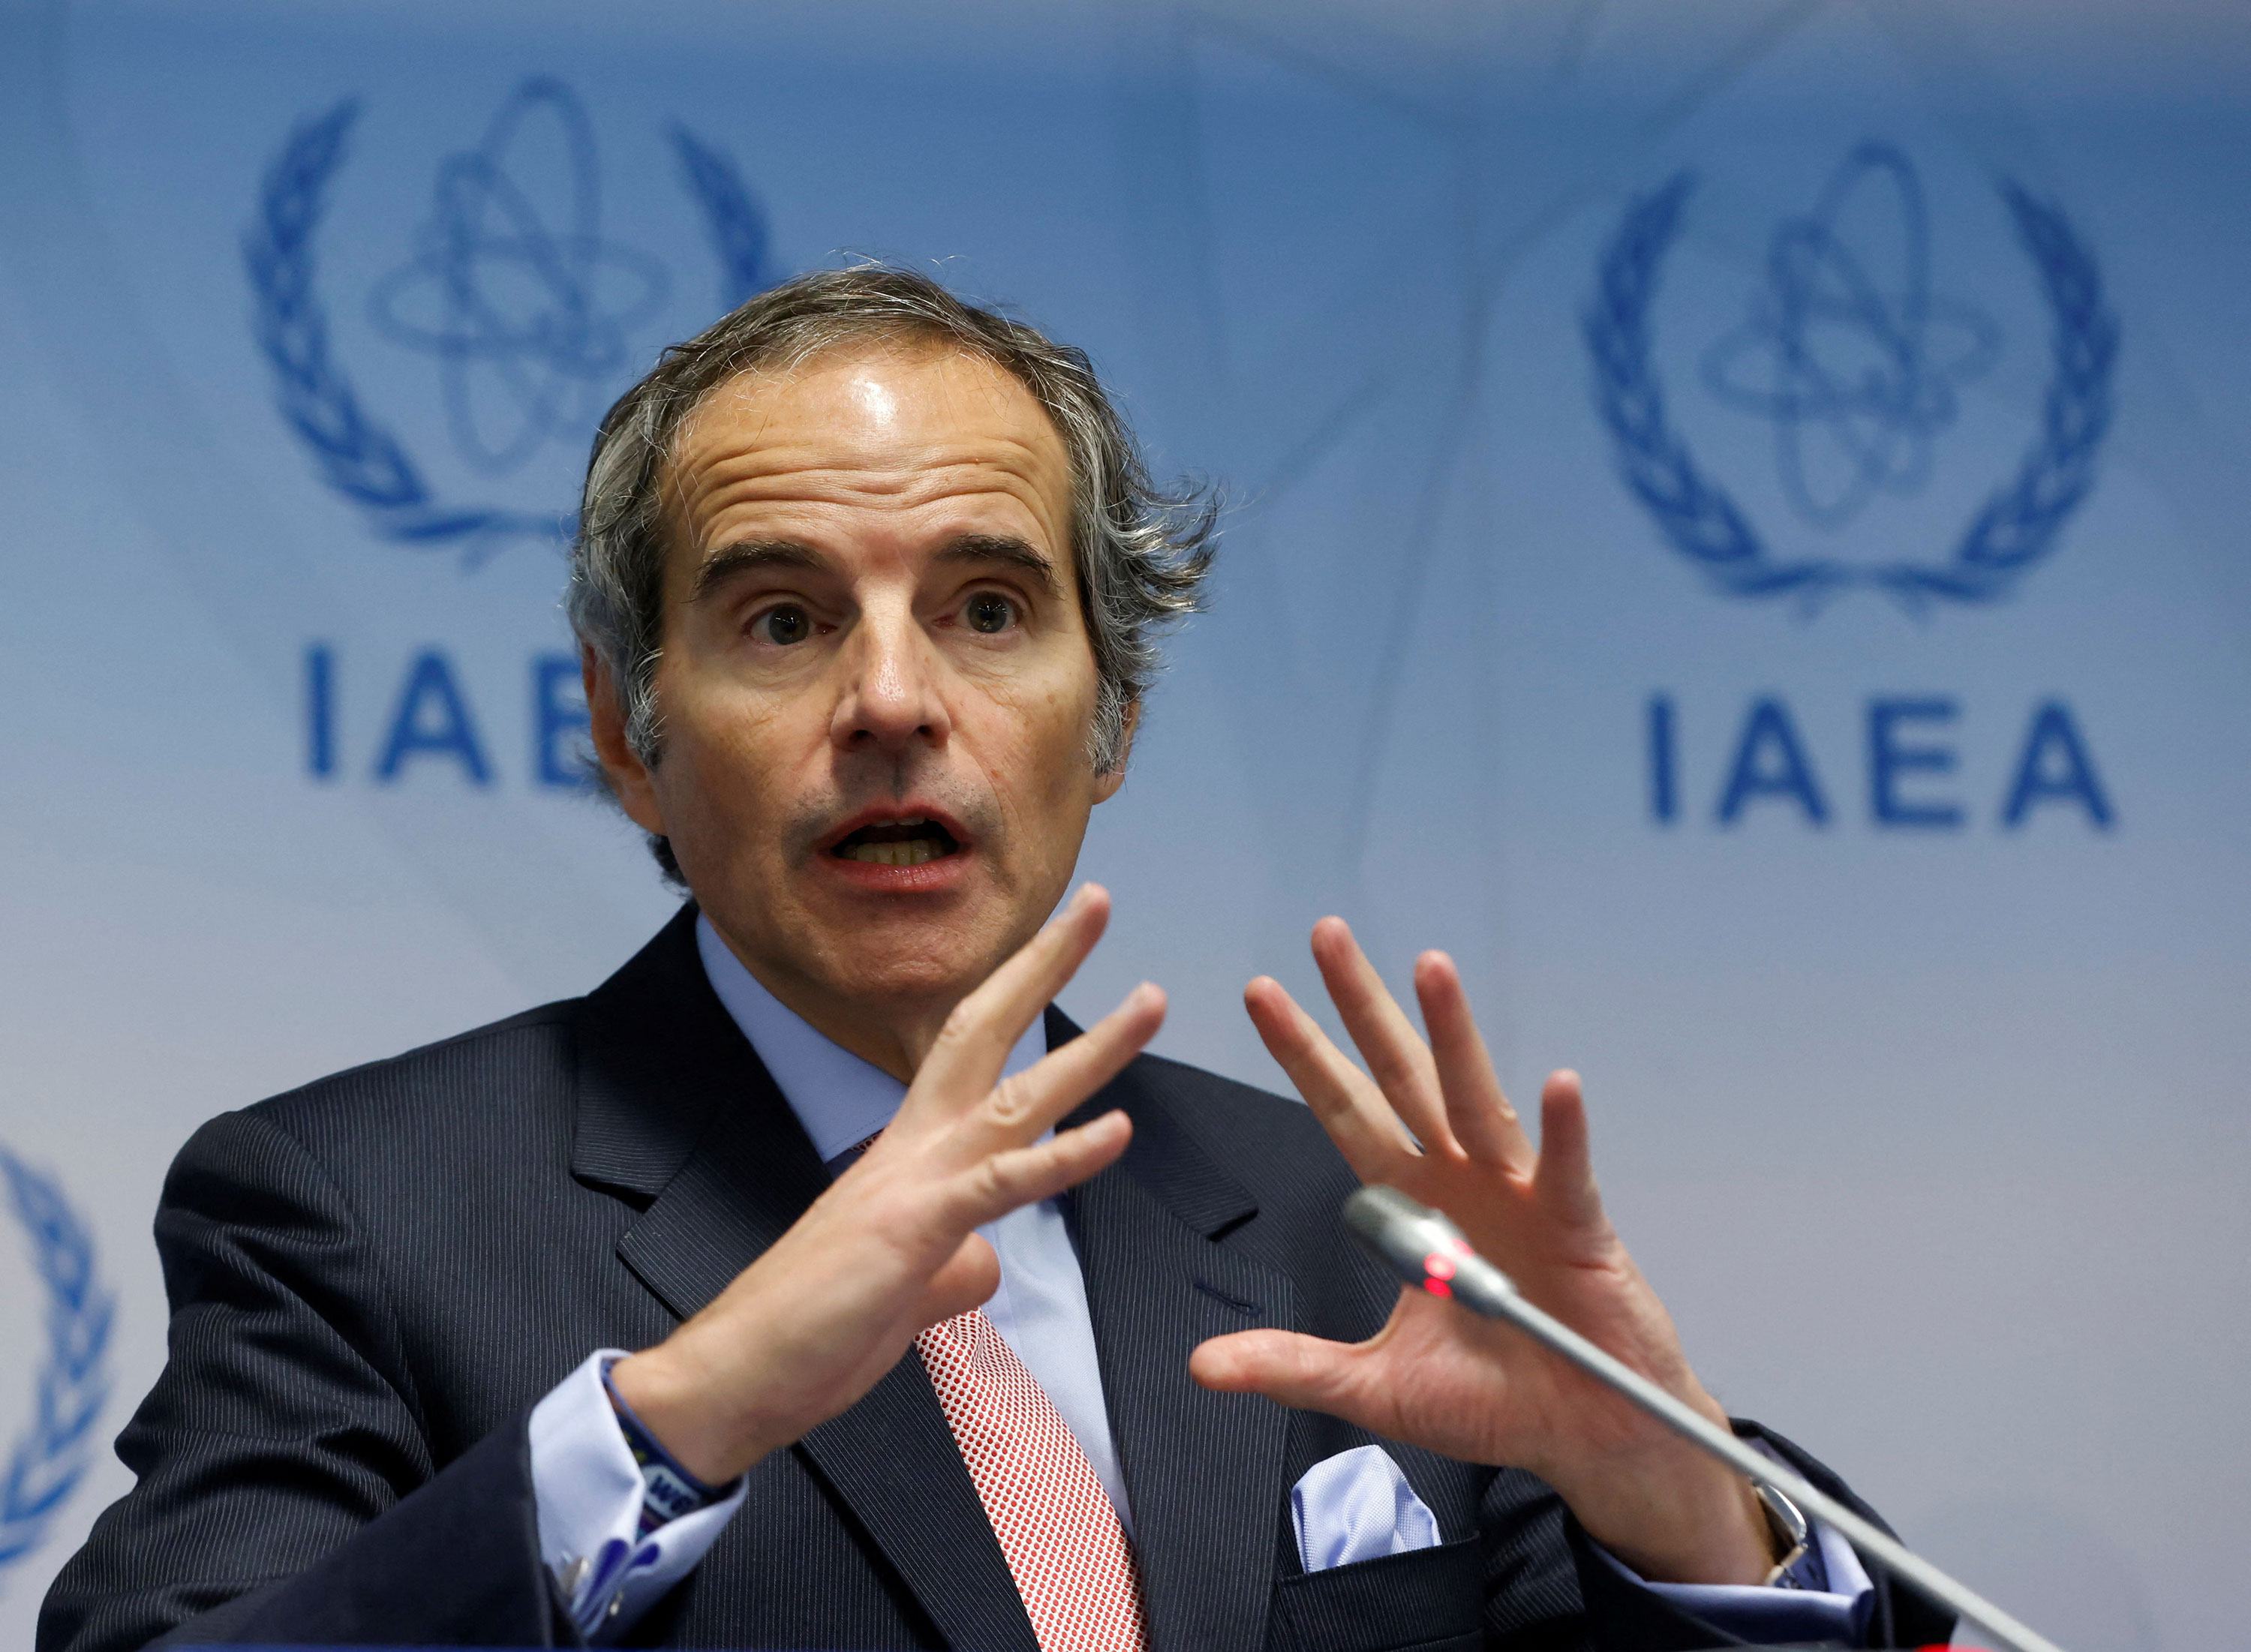 Rafael Grossi, the director general of the International Atomic Energy Agency (IAEA), speaks at a news conference in Vienna, Austria, on March 6. (Leonhard Foeger/Reuters)